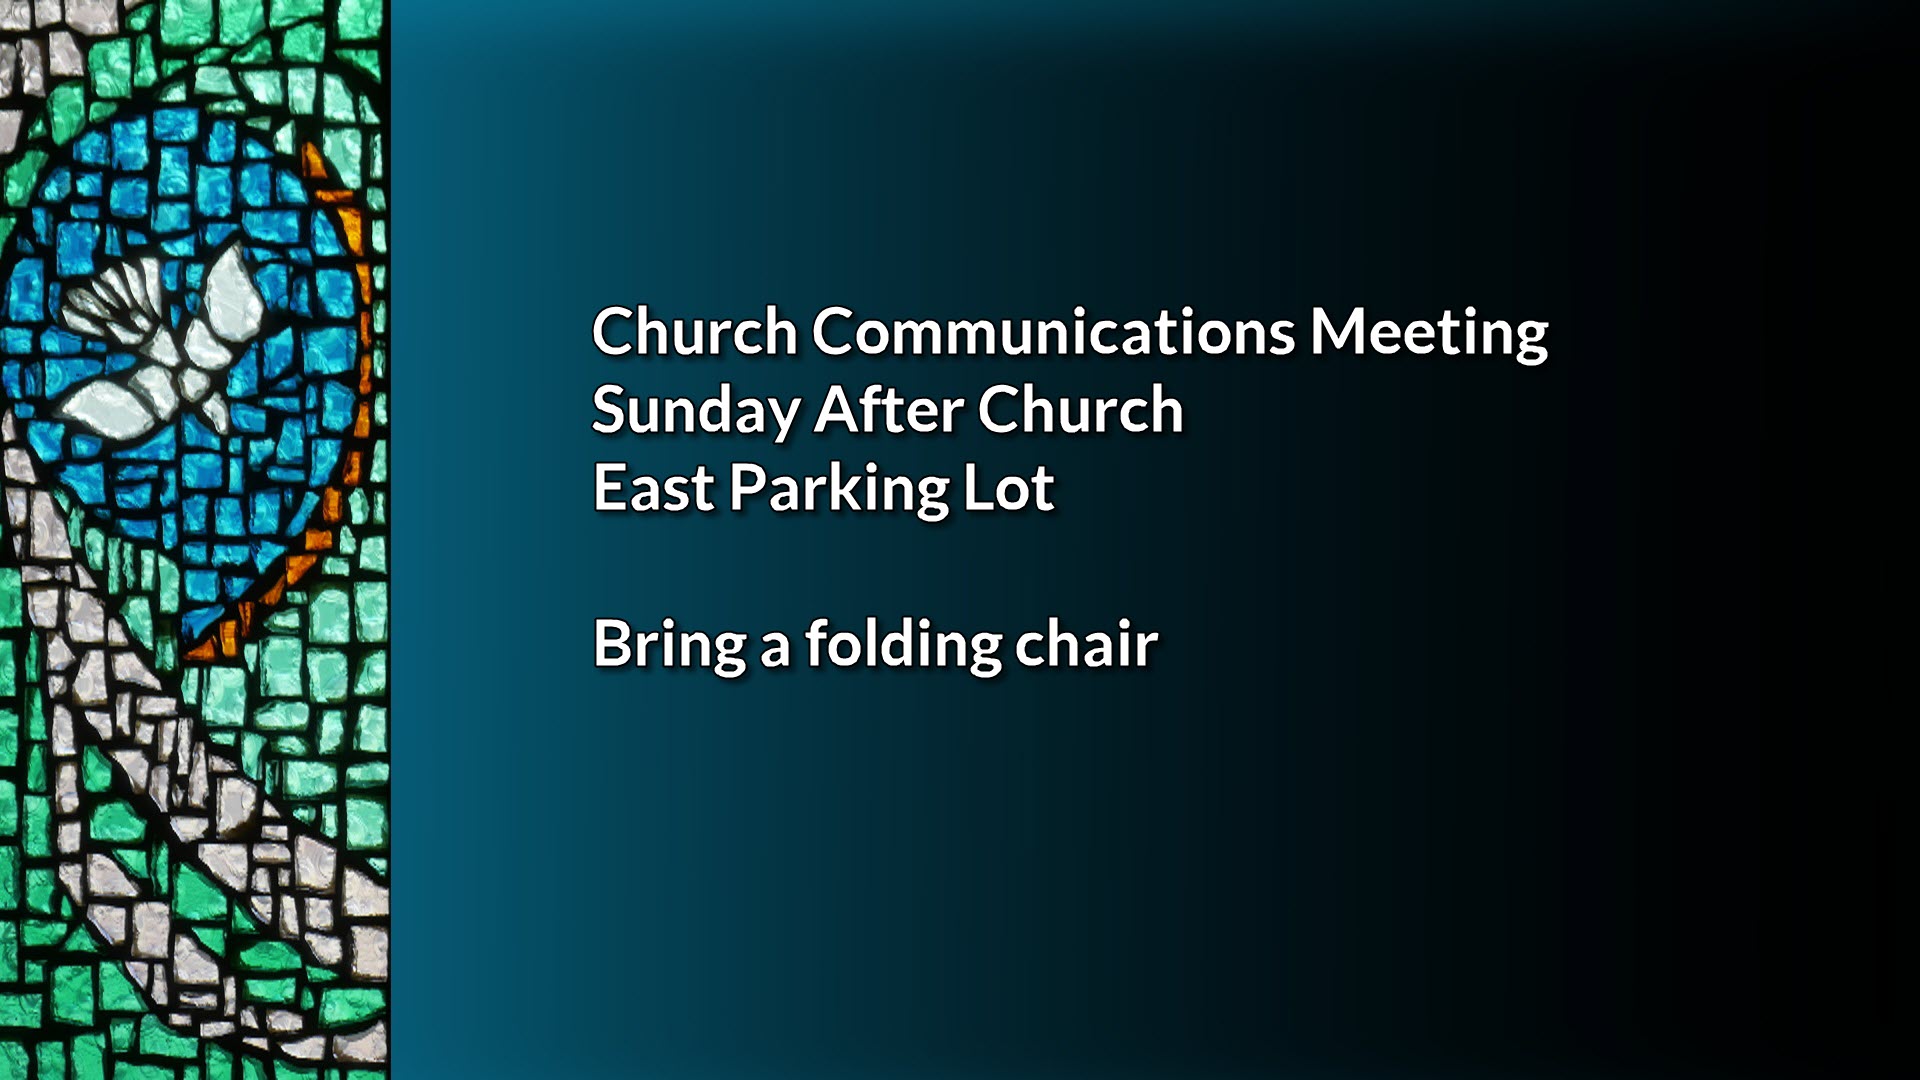 Church Communications Meeting Live Here Sunday After Church, February 21